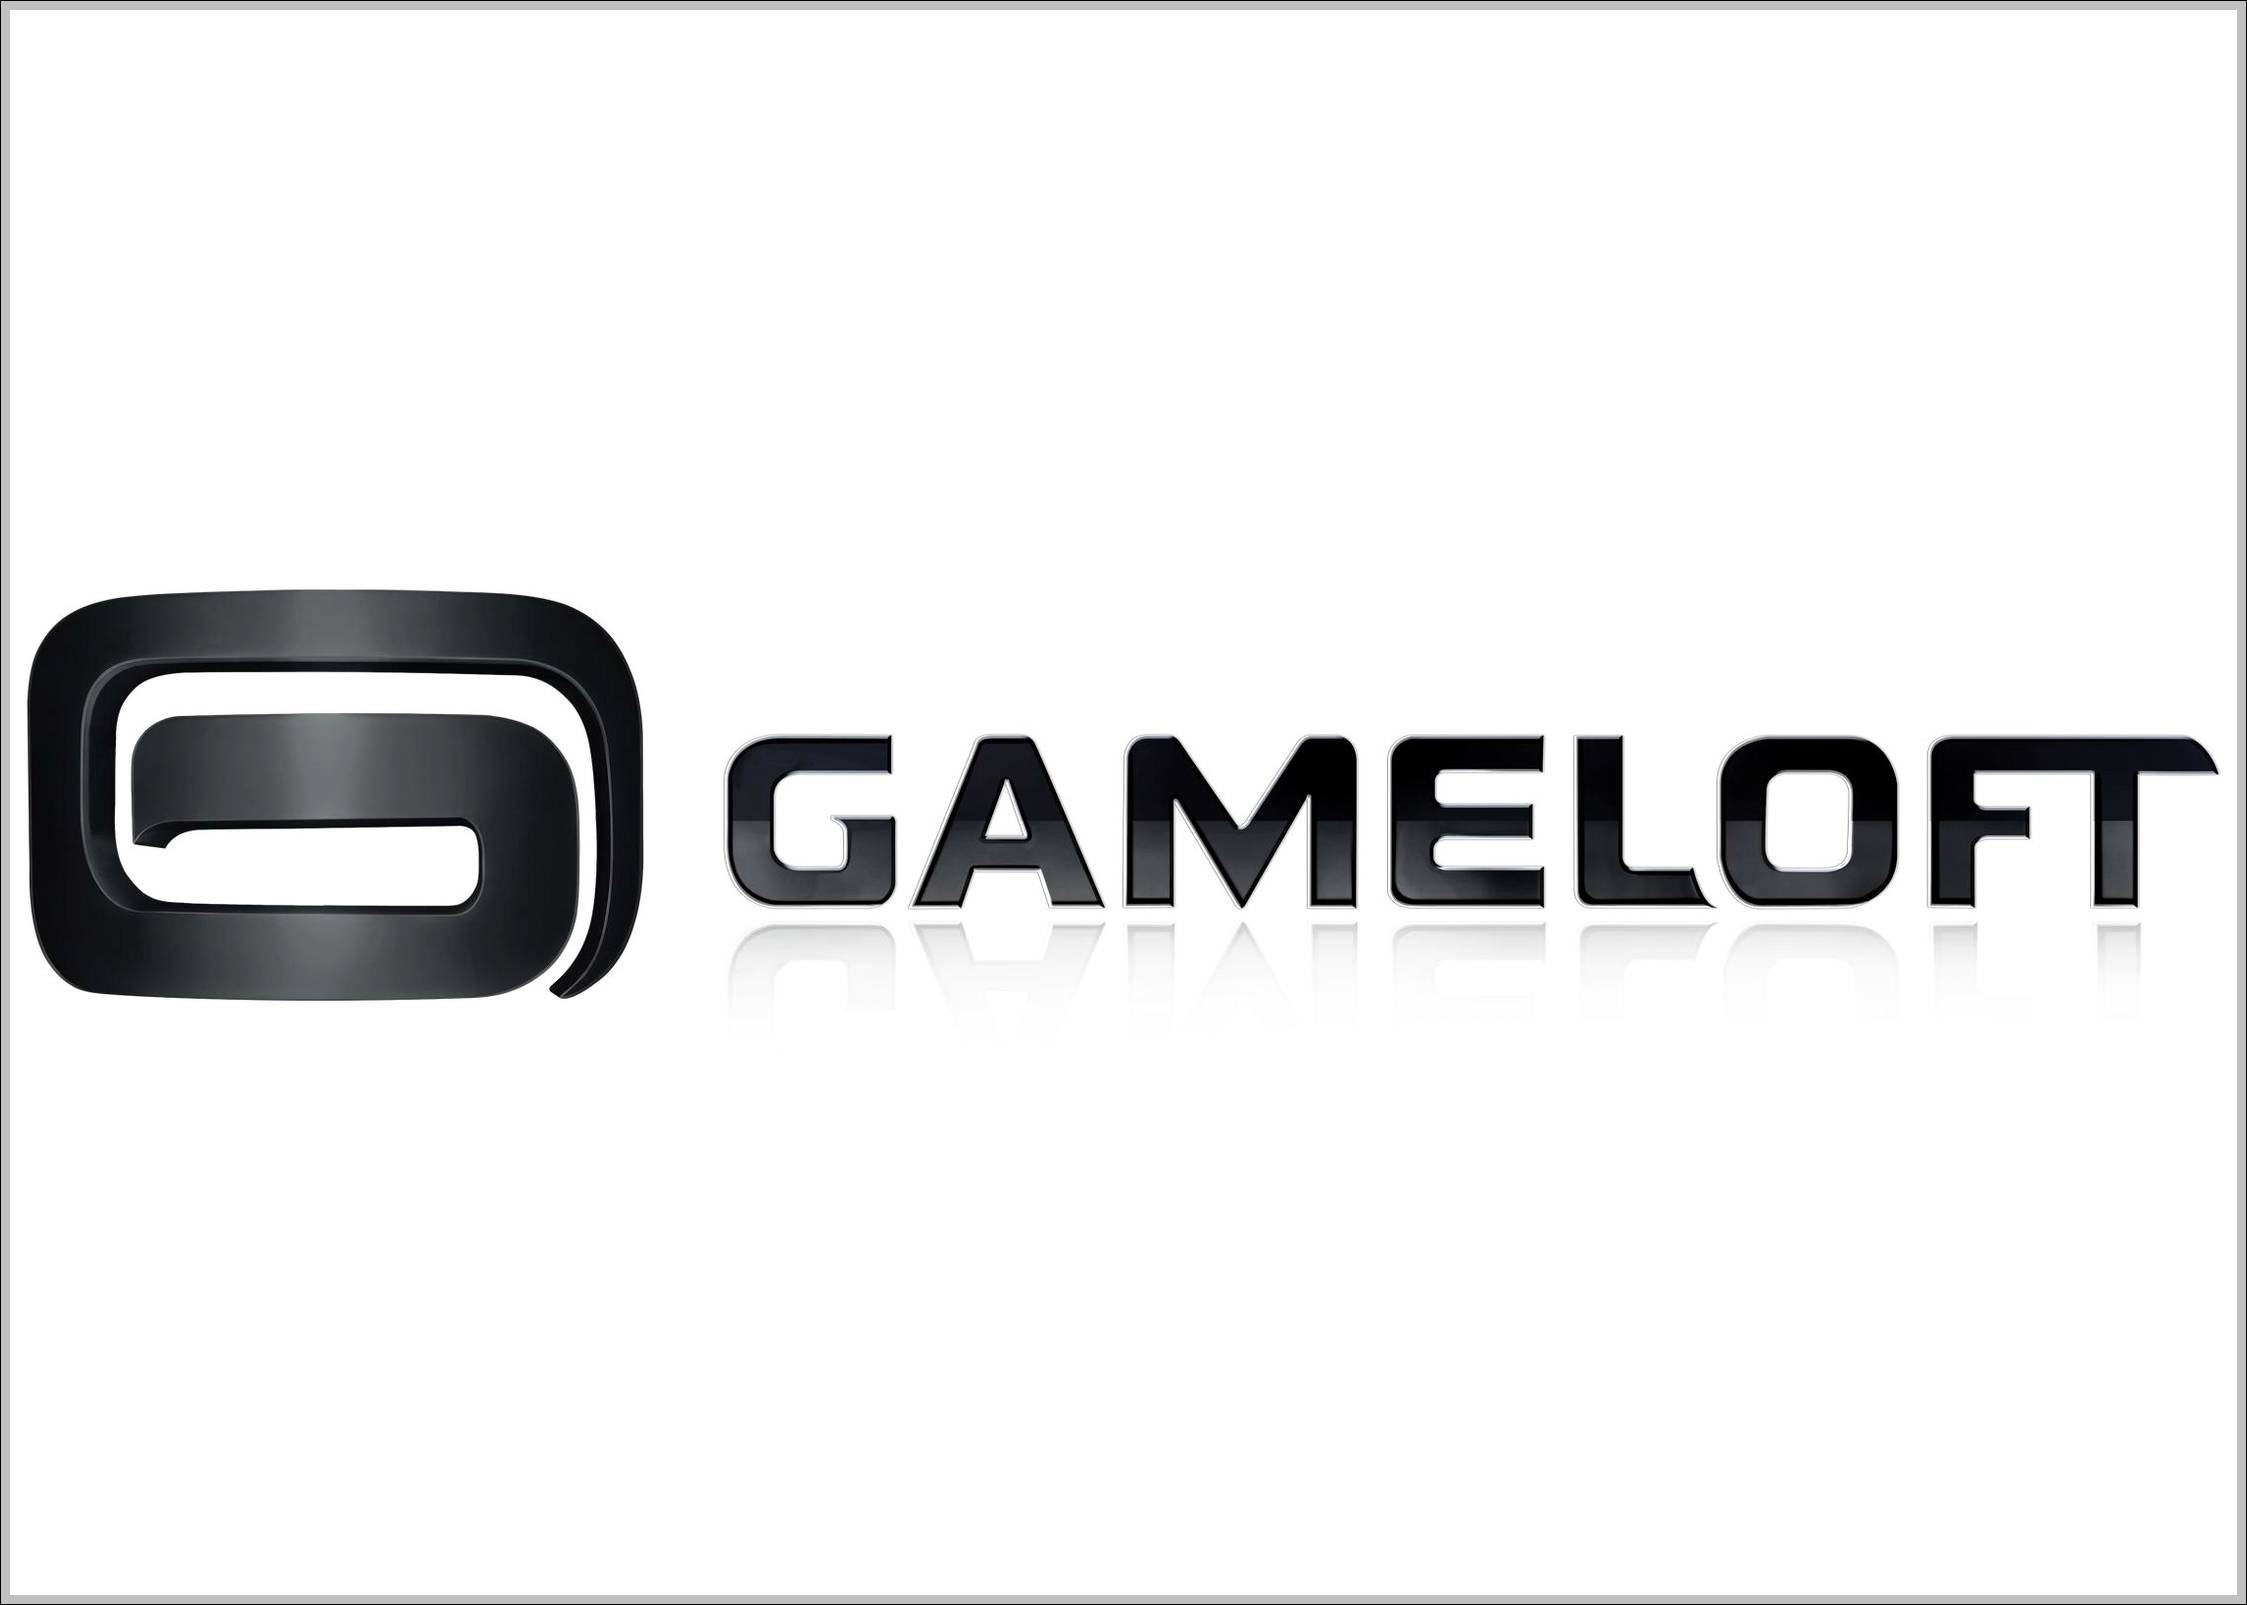 Gameloft logo and sign